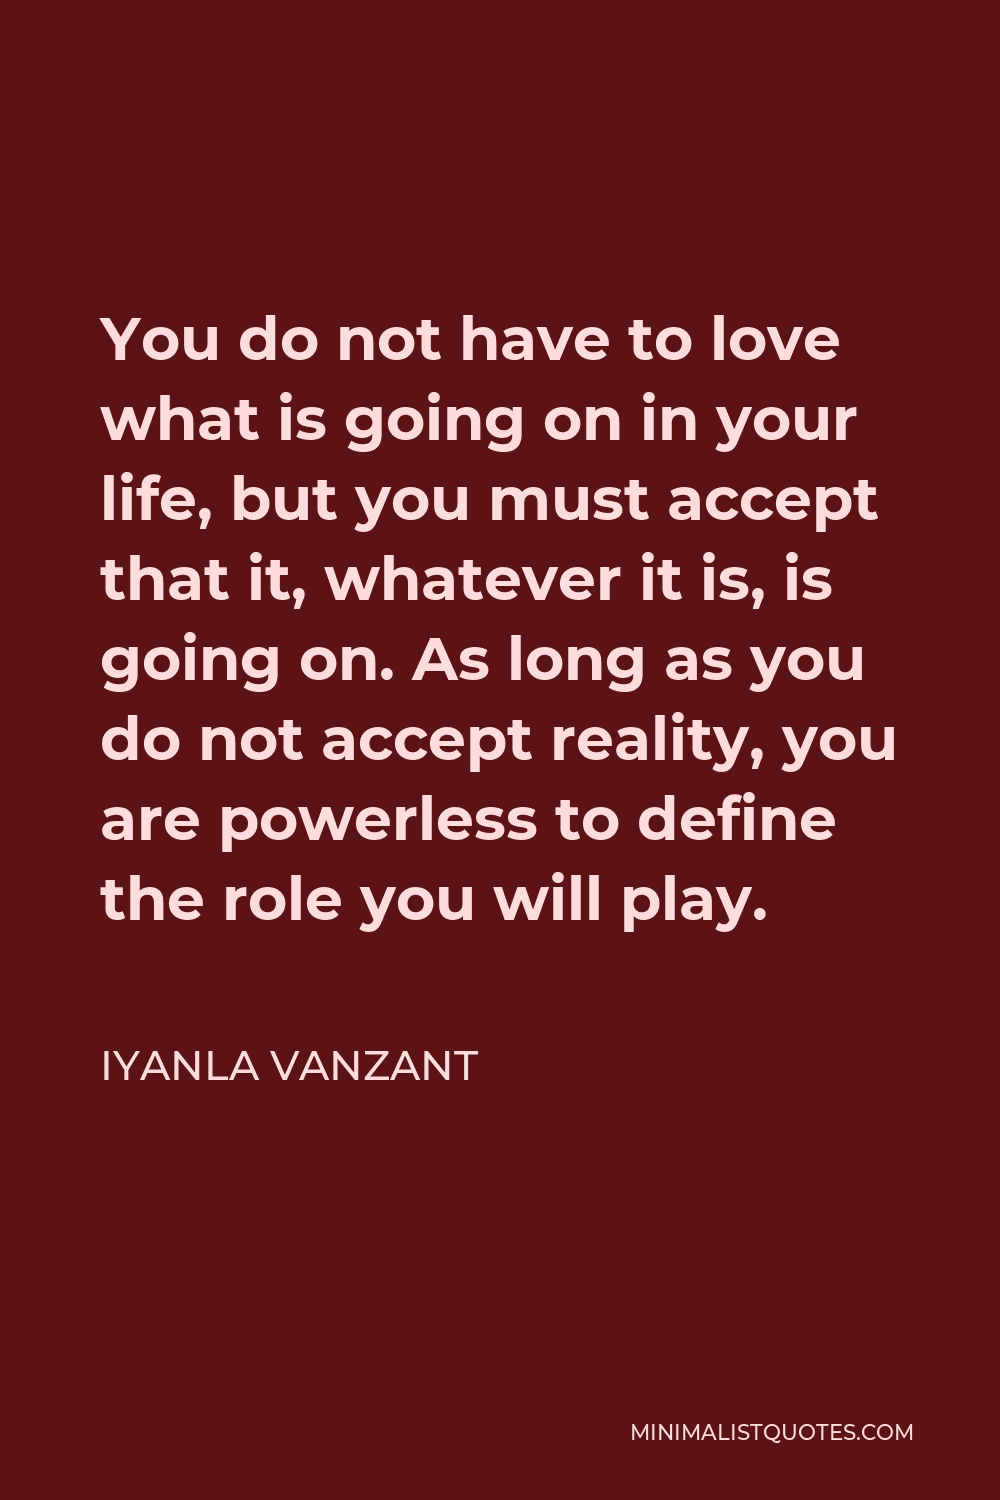 Iyanla Vanzant Quote - You do not have to love what is going on in your life, but you must accept that it, whatever it is, is going on. As long as you do not accept reality, you are powerless to define the role you will play.